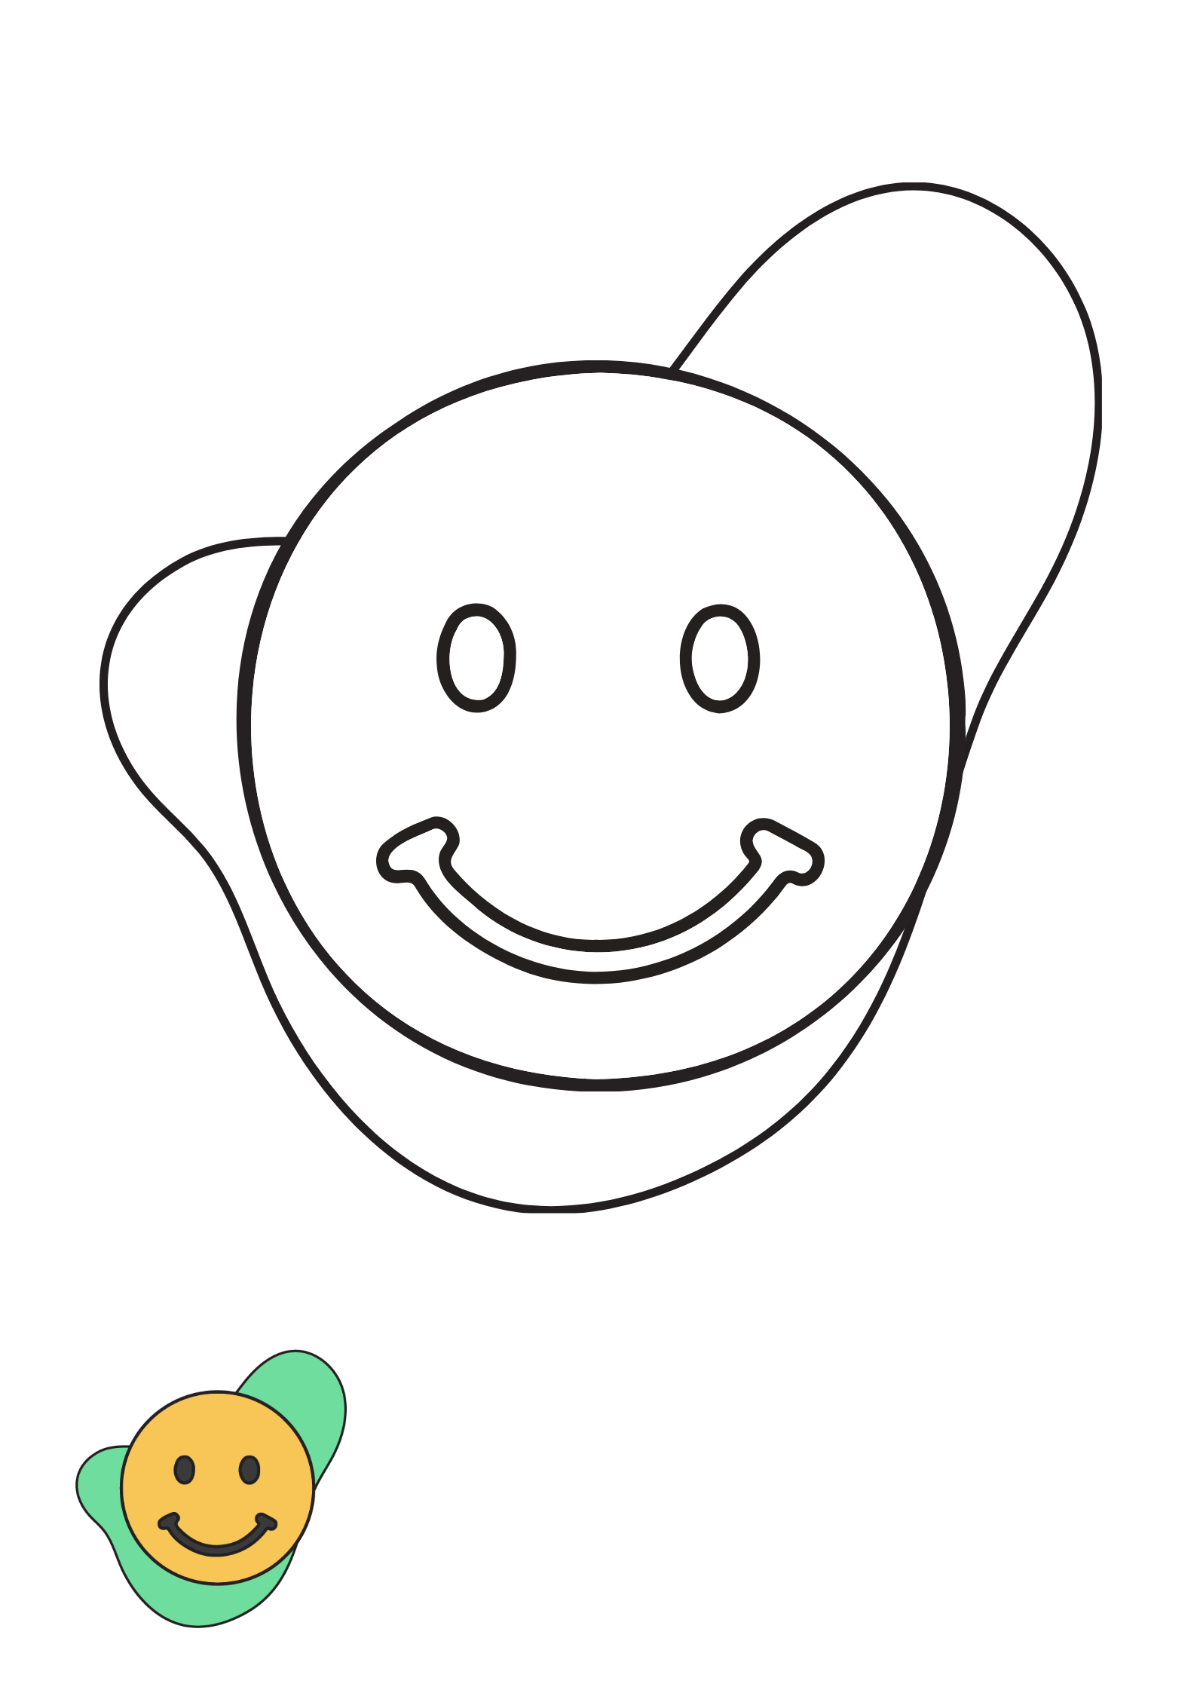 Smiley Face coloring page Template